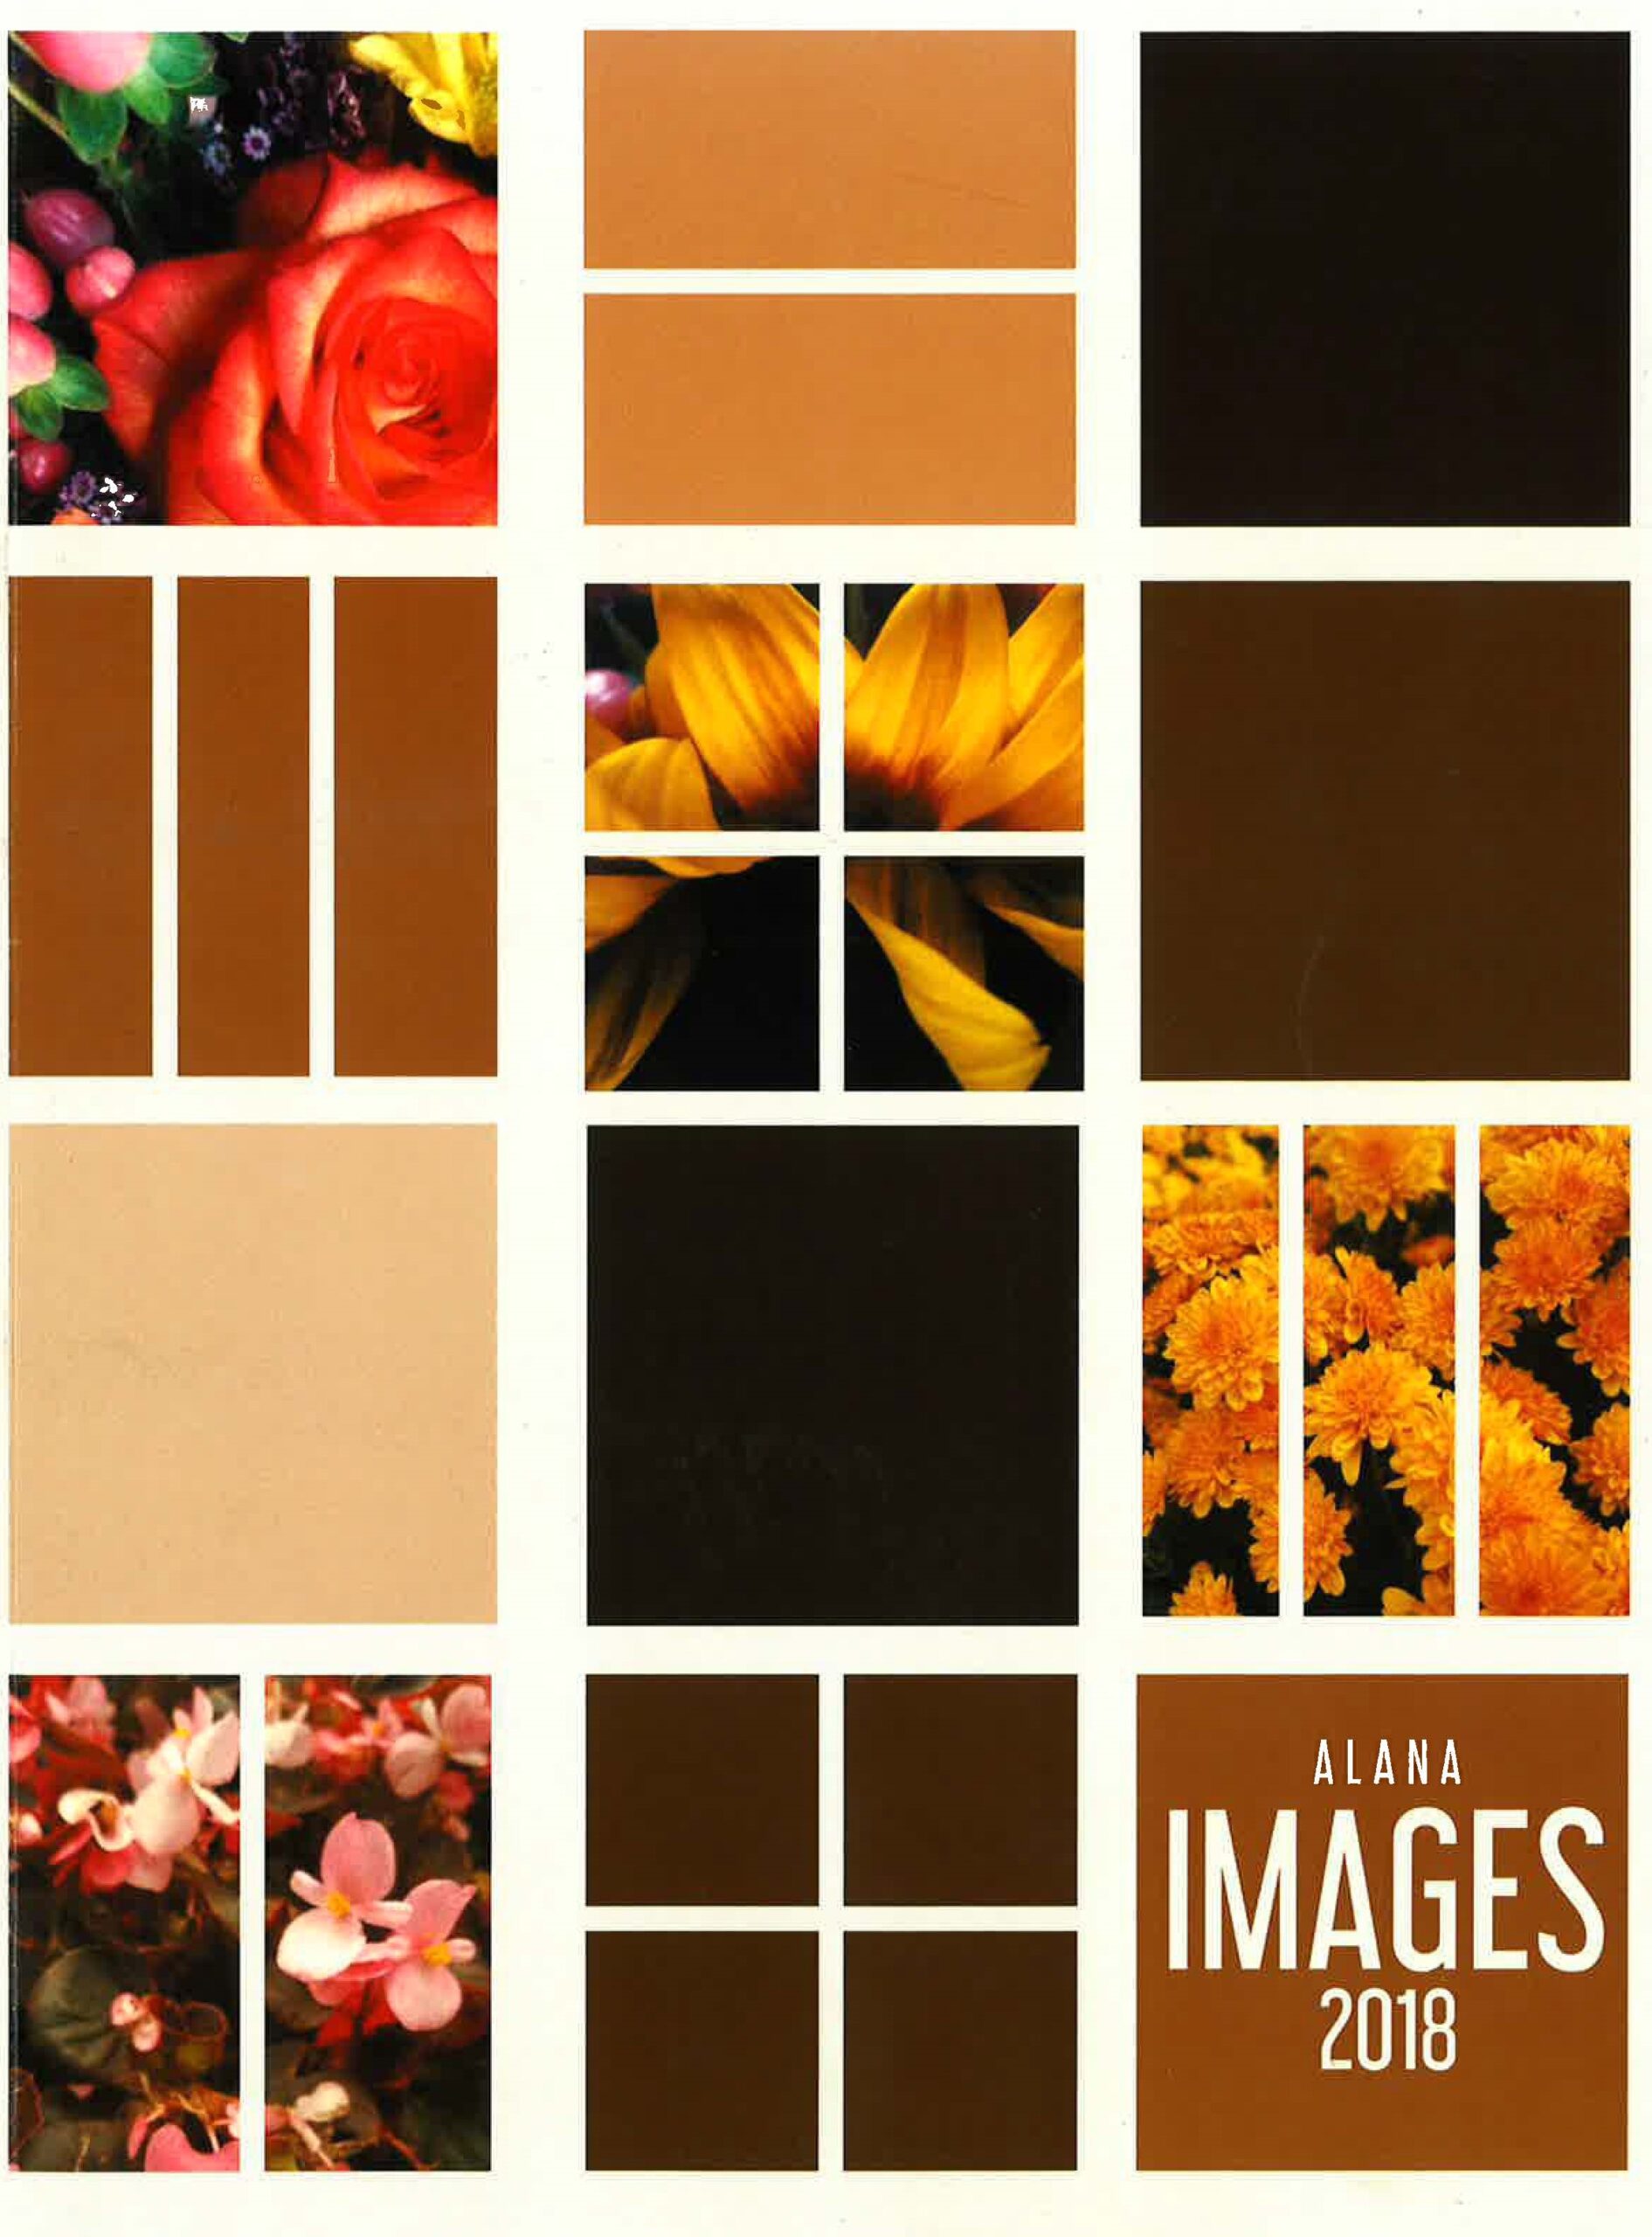 IMAGES 2018 cover with 12 square sections containing different flowers in red, yellow and pink along with shades of brown. 